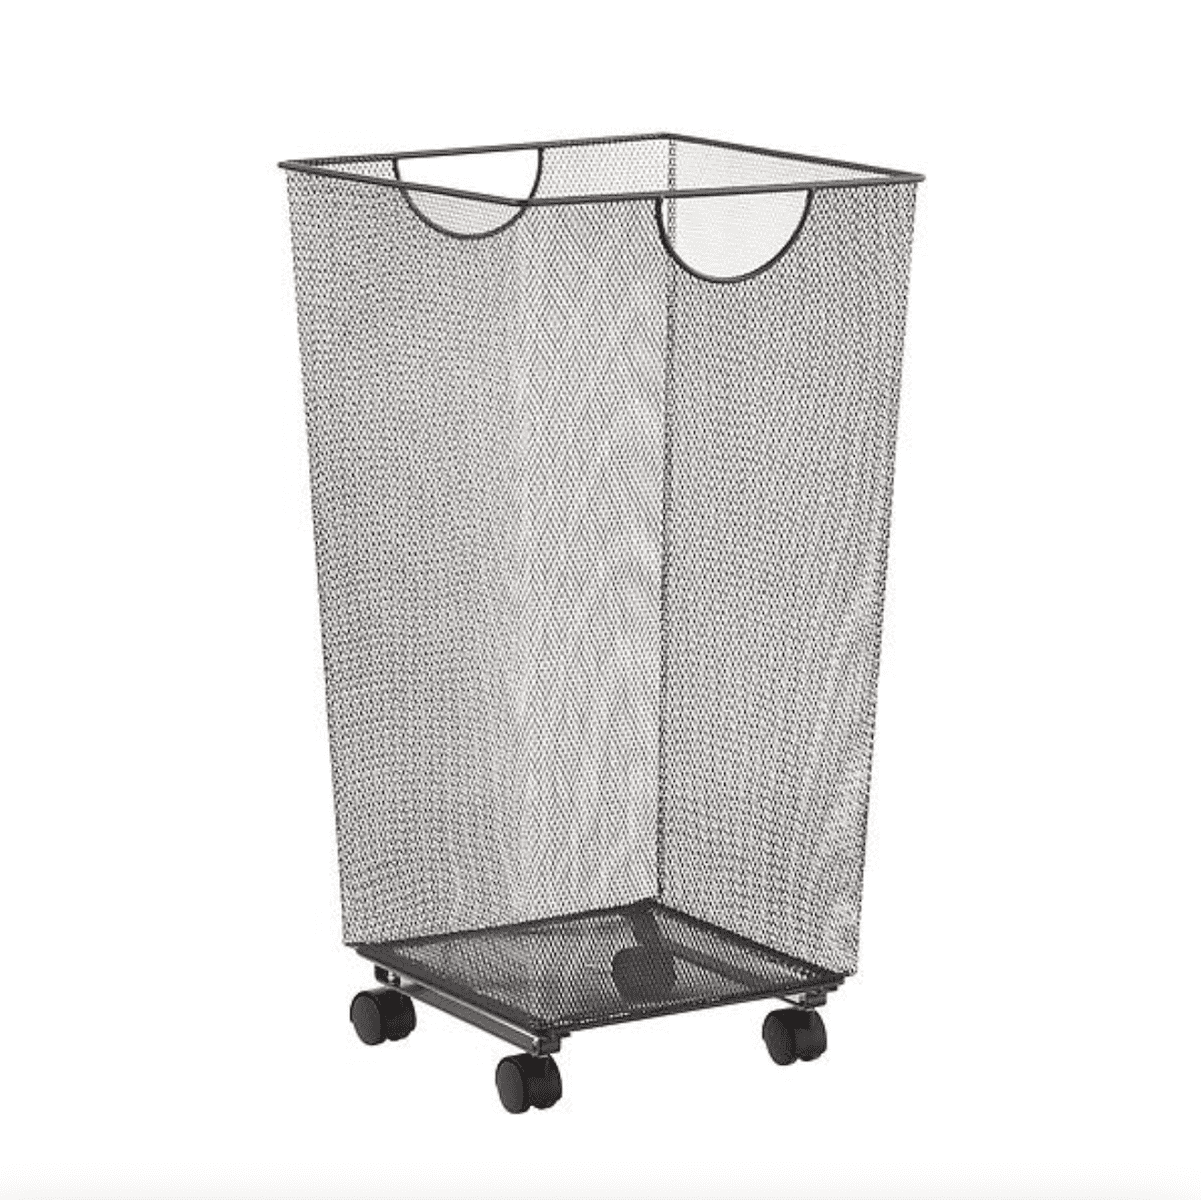 Large Collapsible Laundry Basket– Life's a breeze GB Ltd